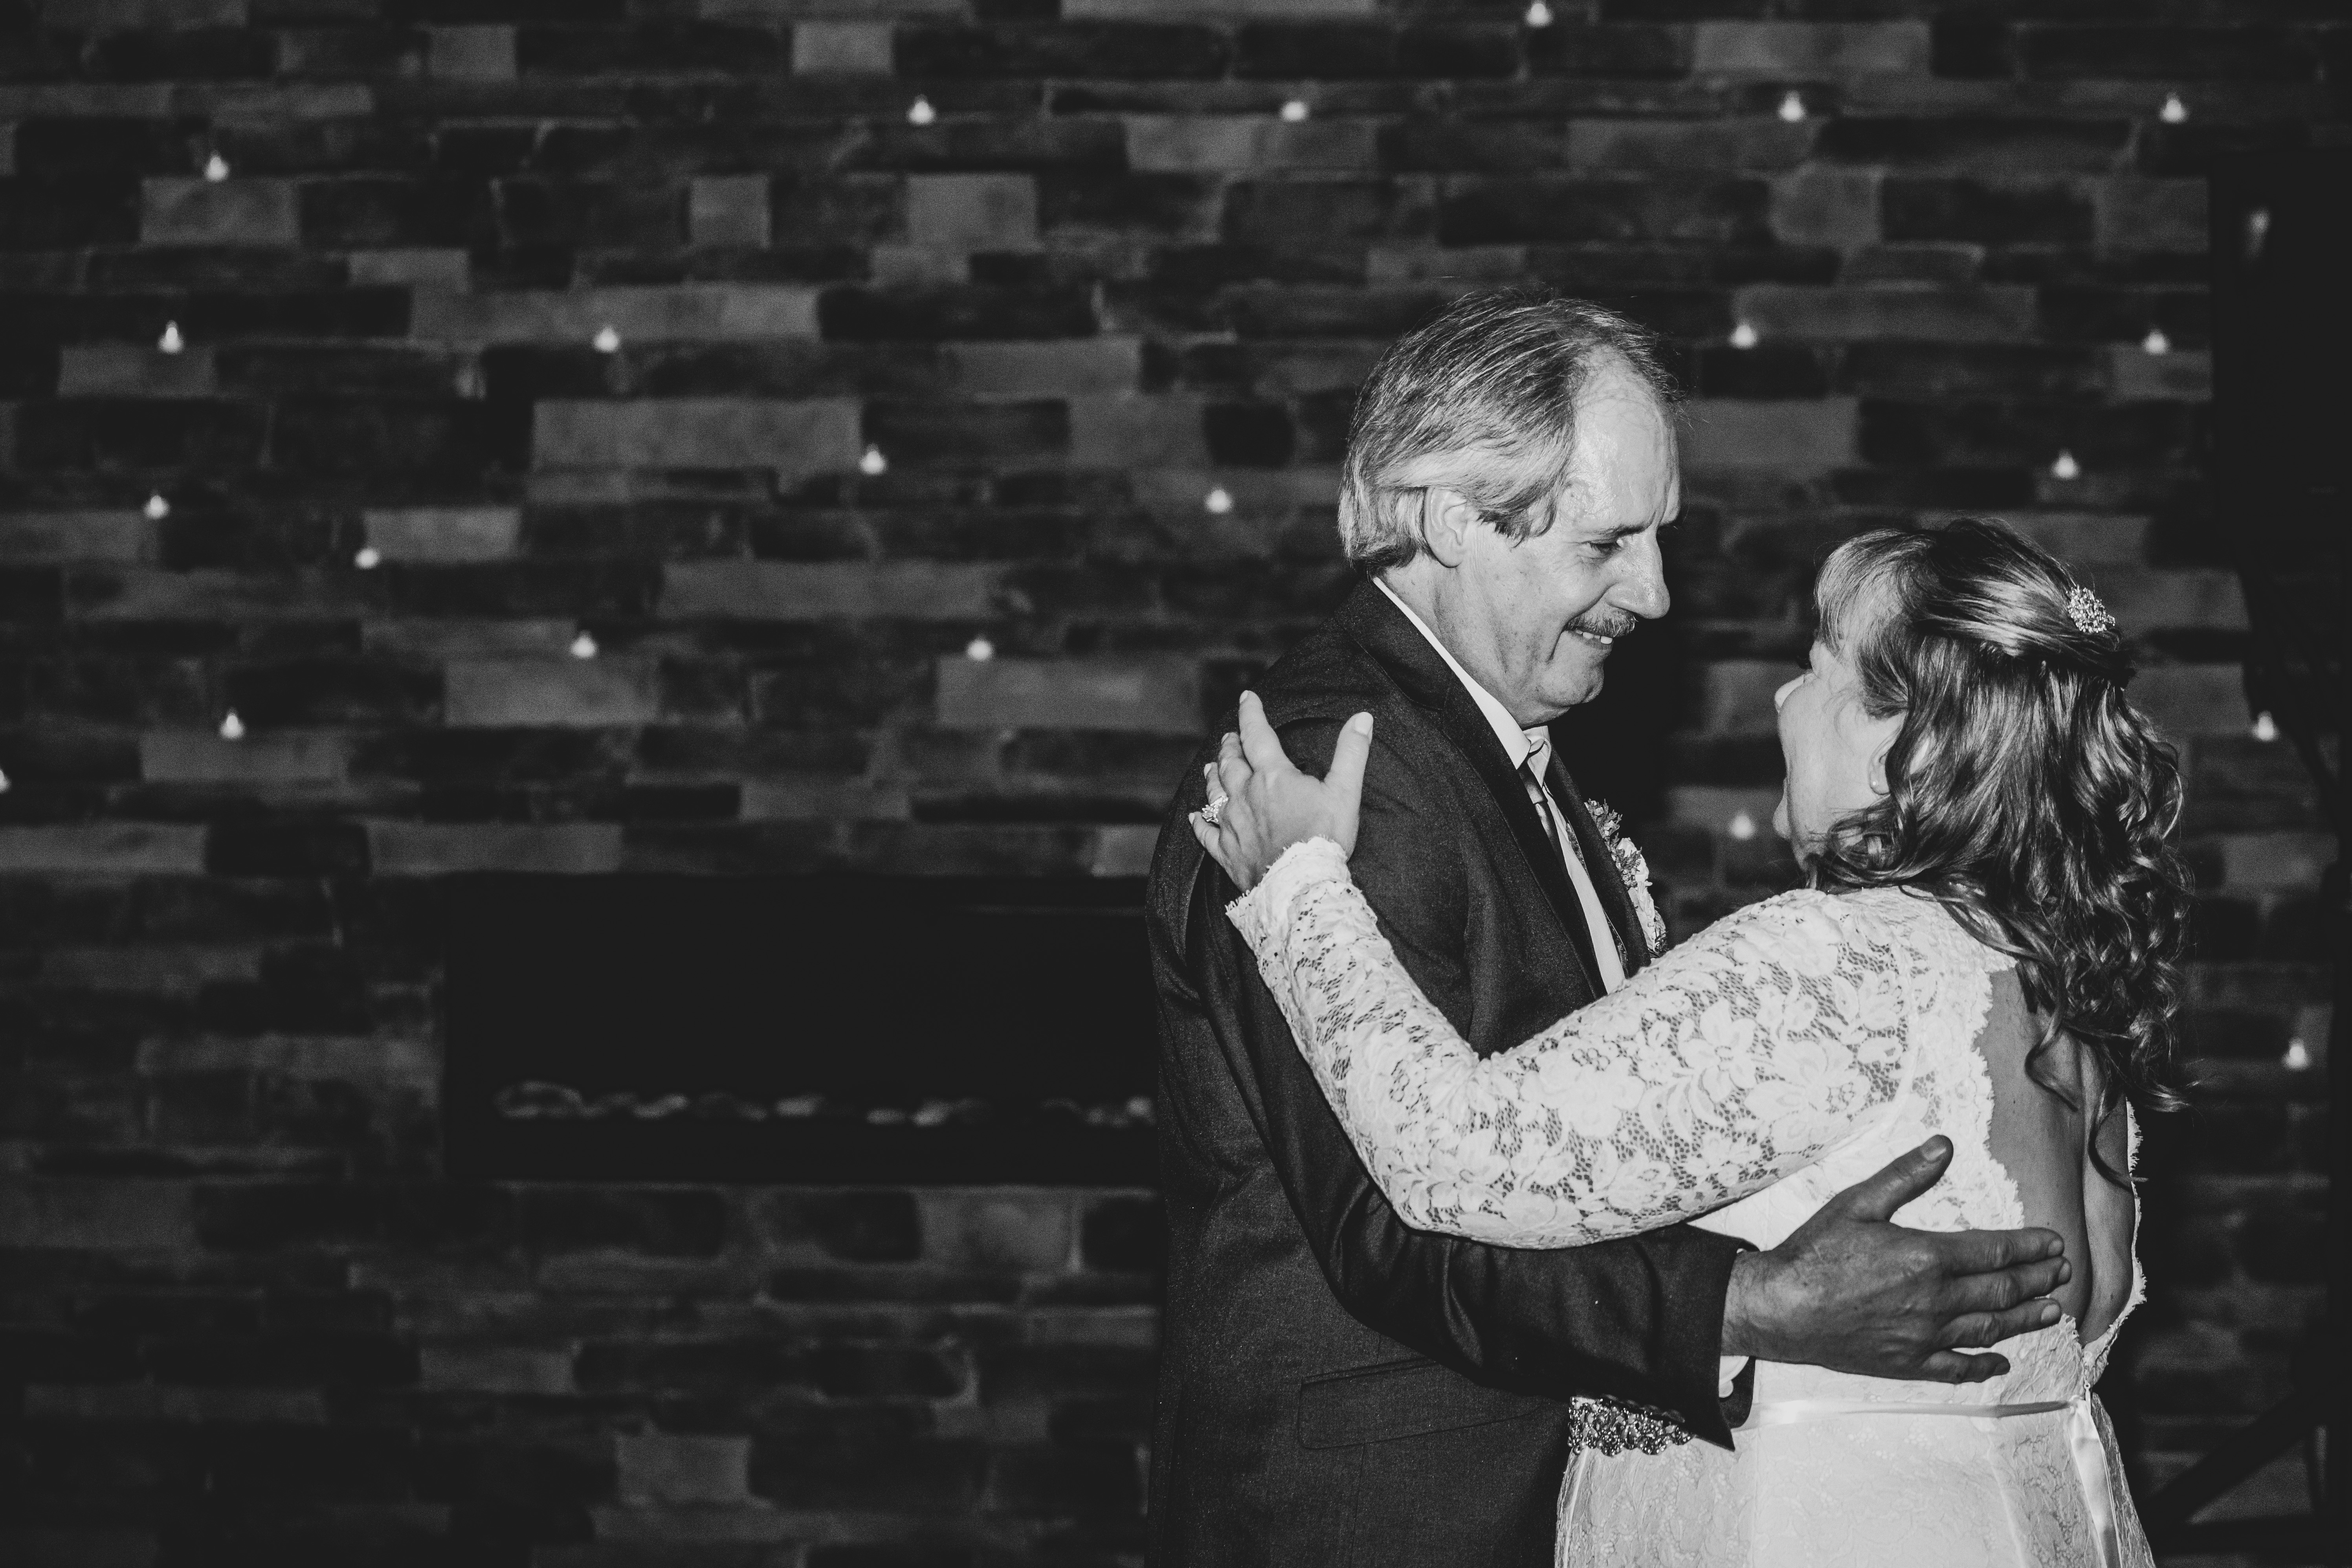 Intimate cozy wedding - first dance by fireplace